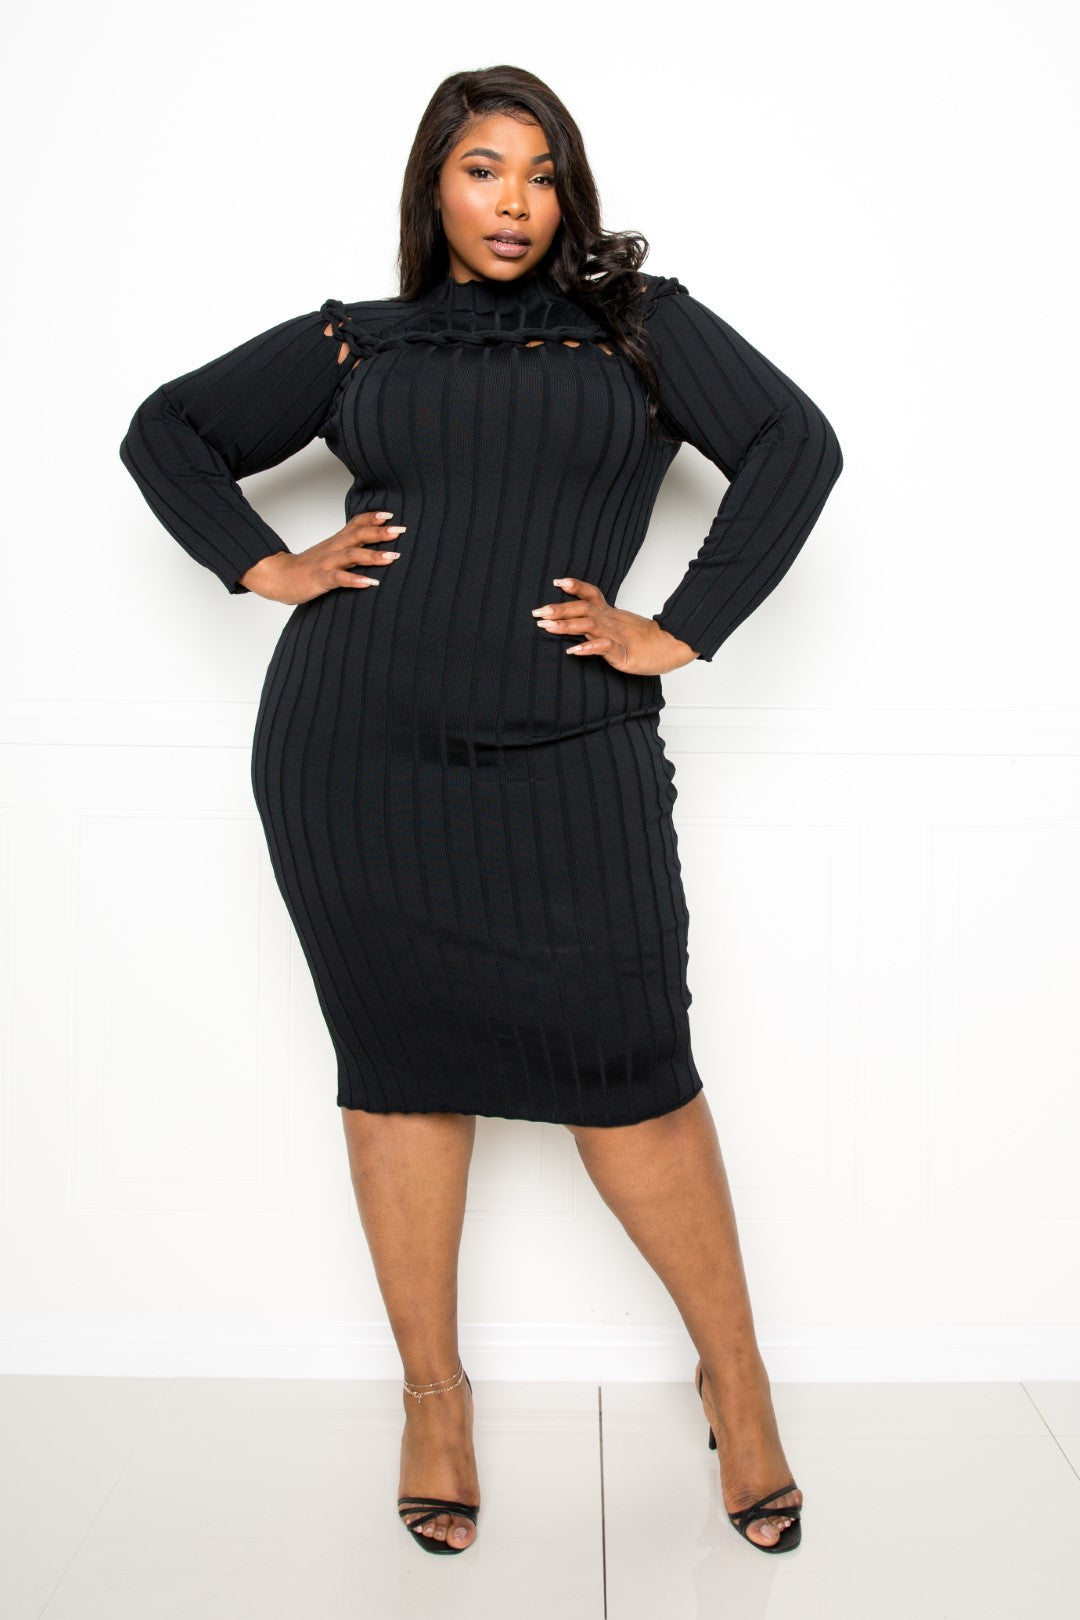 Plus Size Bodycon Sweater Dress With Knot Detail - Tigbuls Variety Fashion